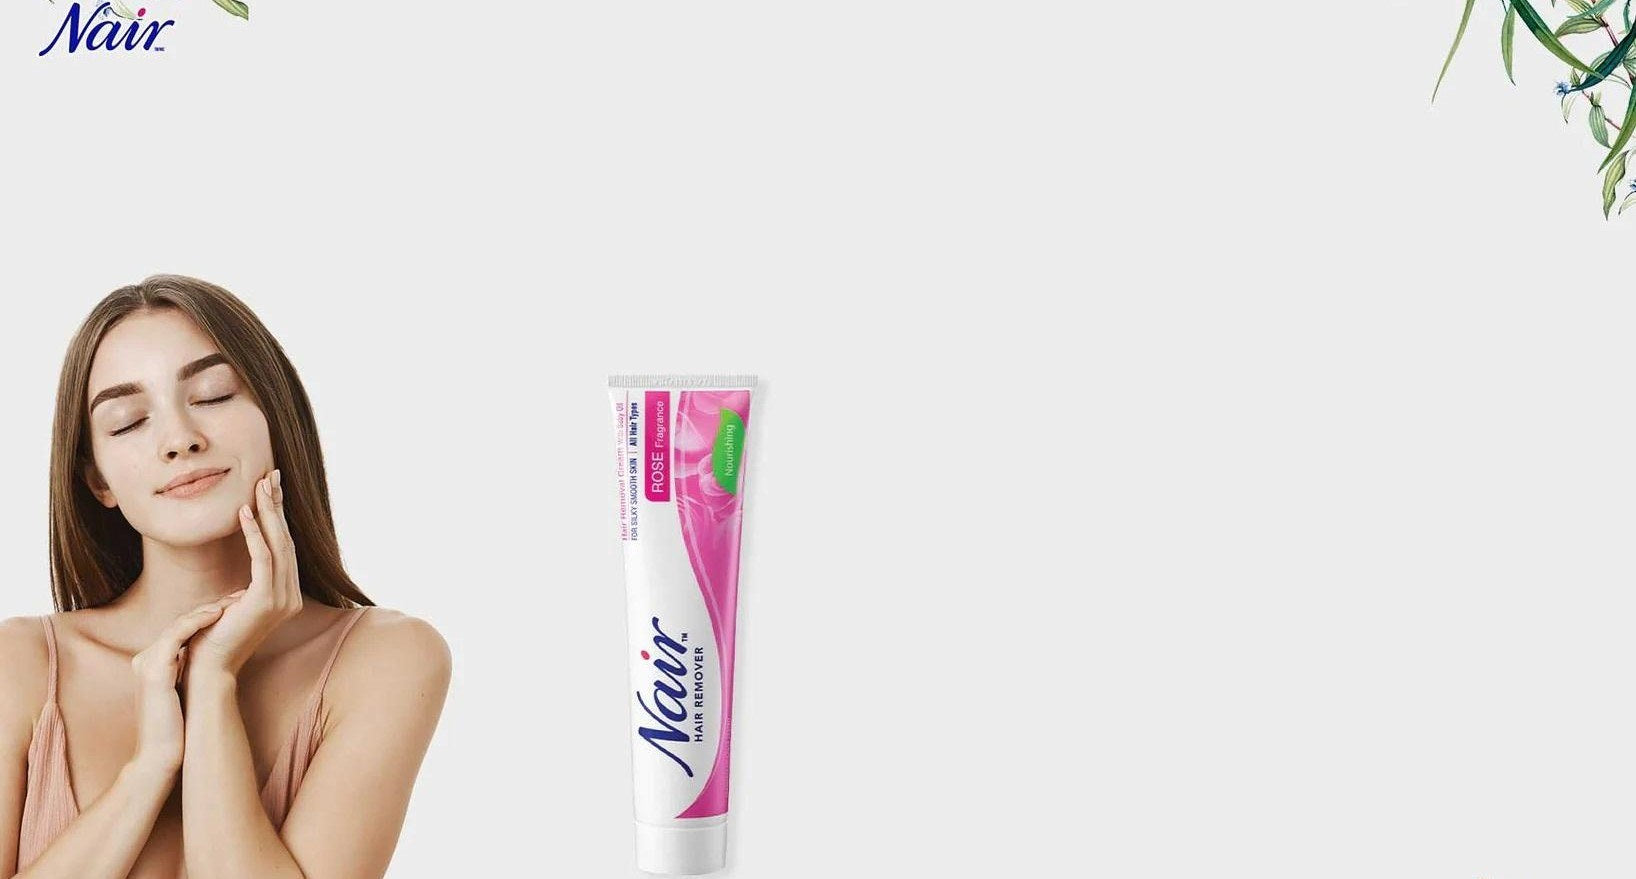 Why Does Nair Smell So Bad?